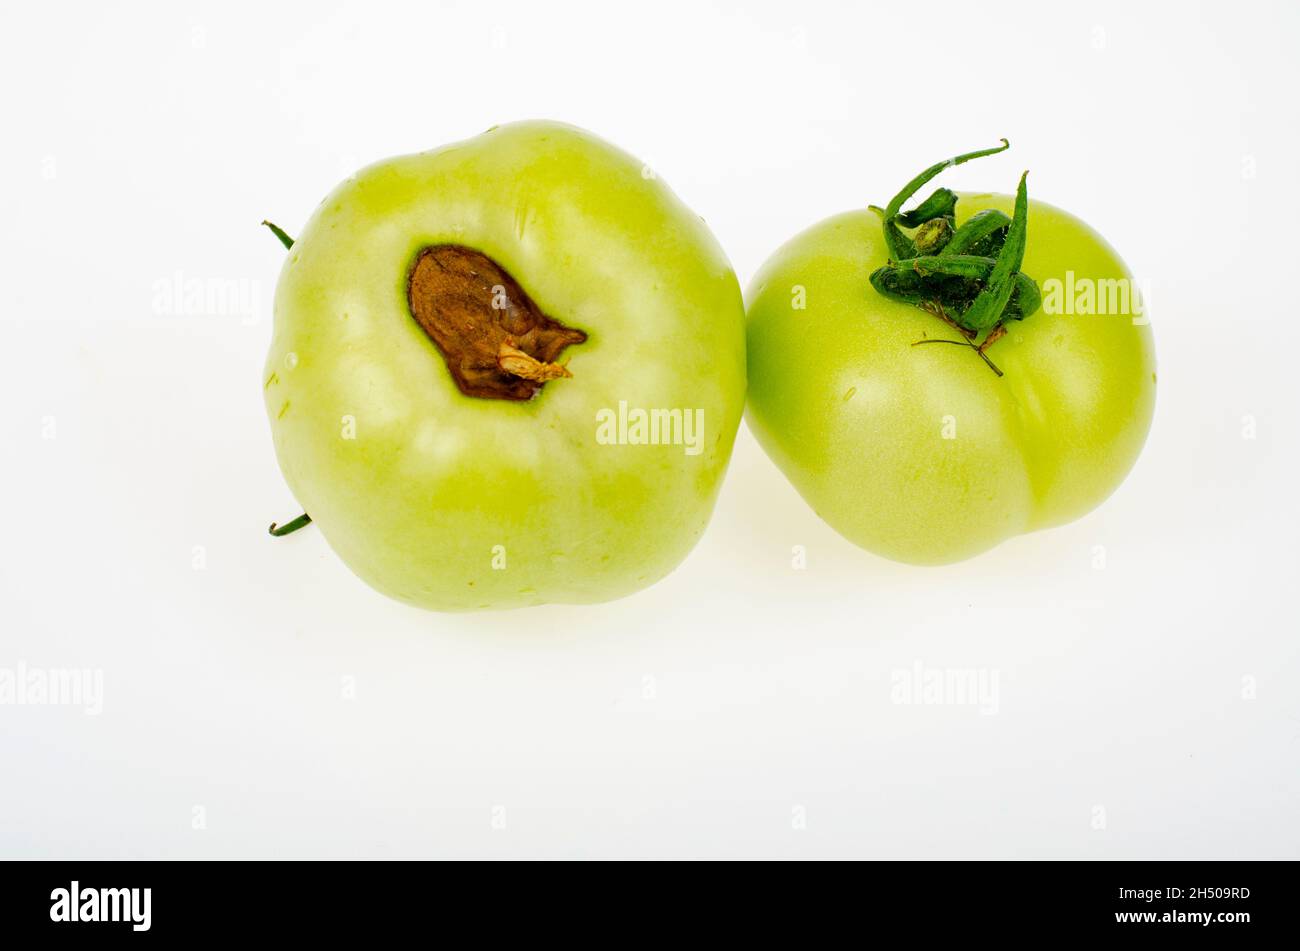 Diseases of tomatoes, top rot on fruits. Studio Photo. Stock Photo